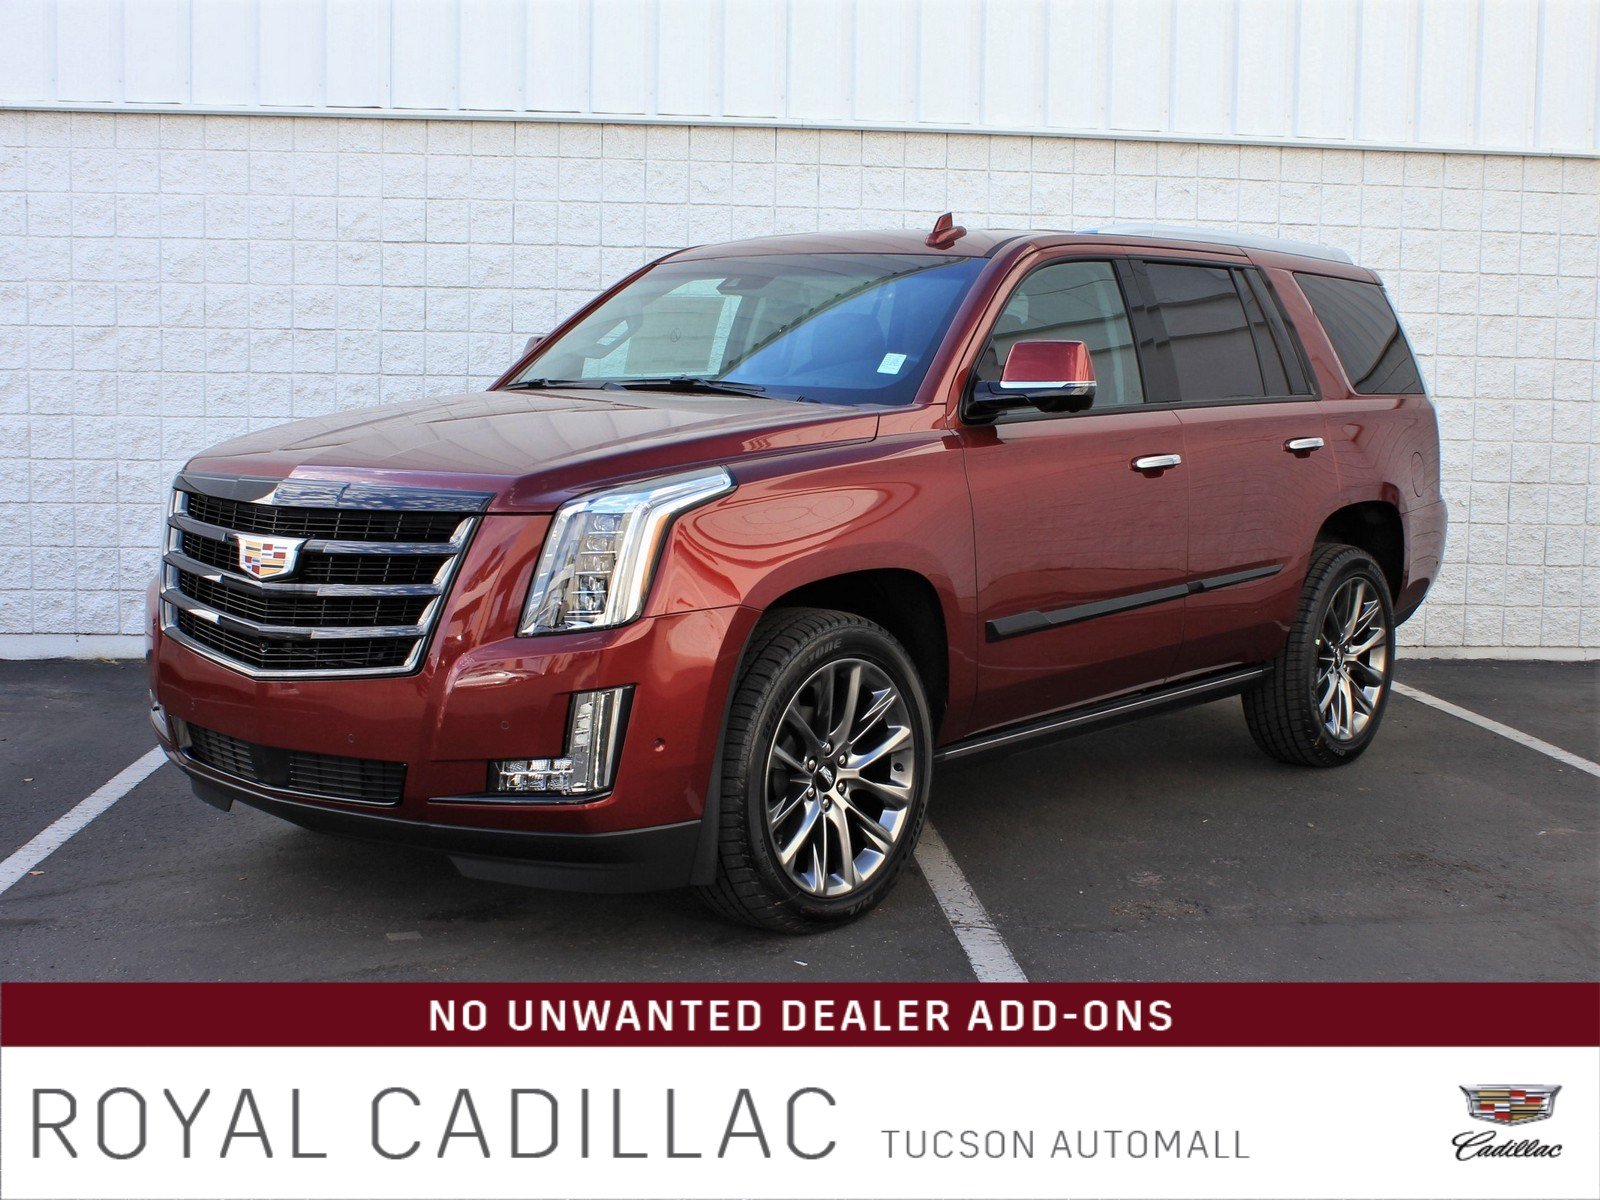 New 2020 Cadillac Escalade Premium Luxury With Navigation 4wd